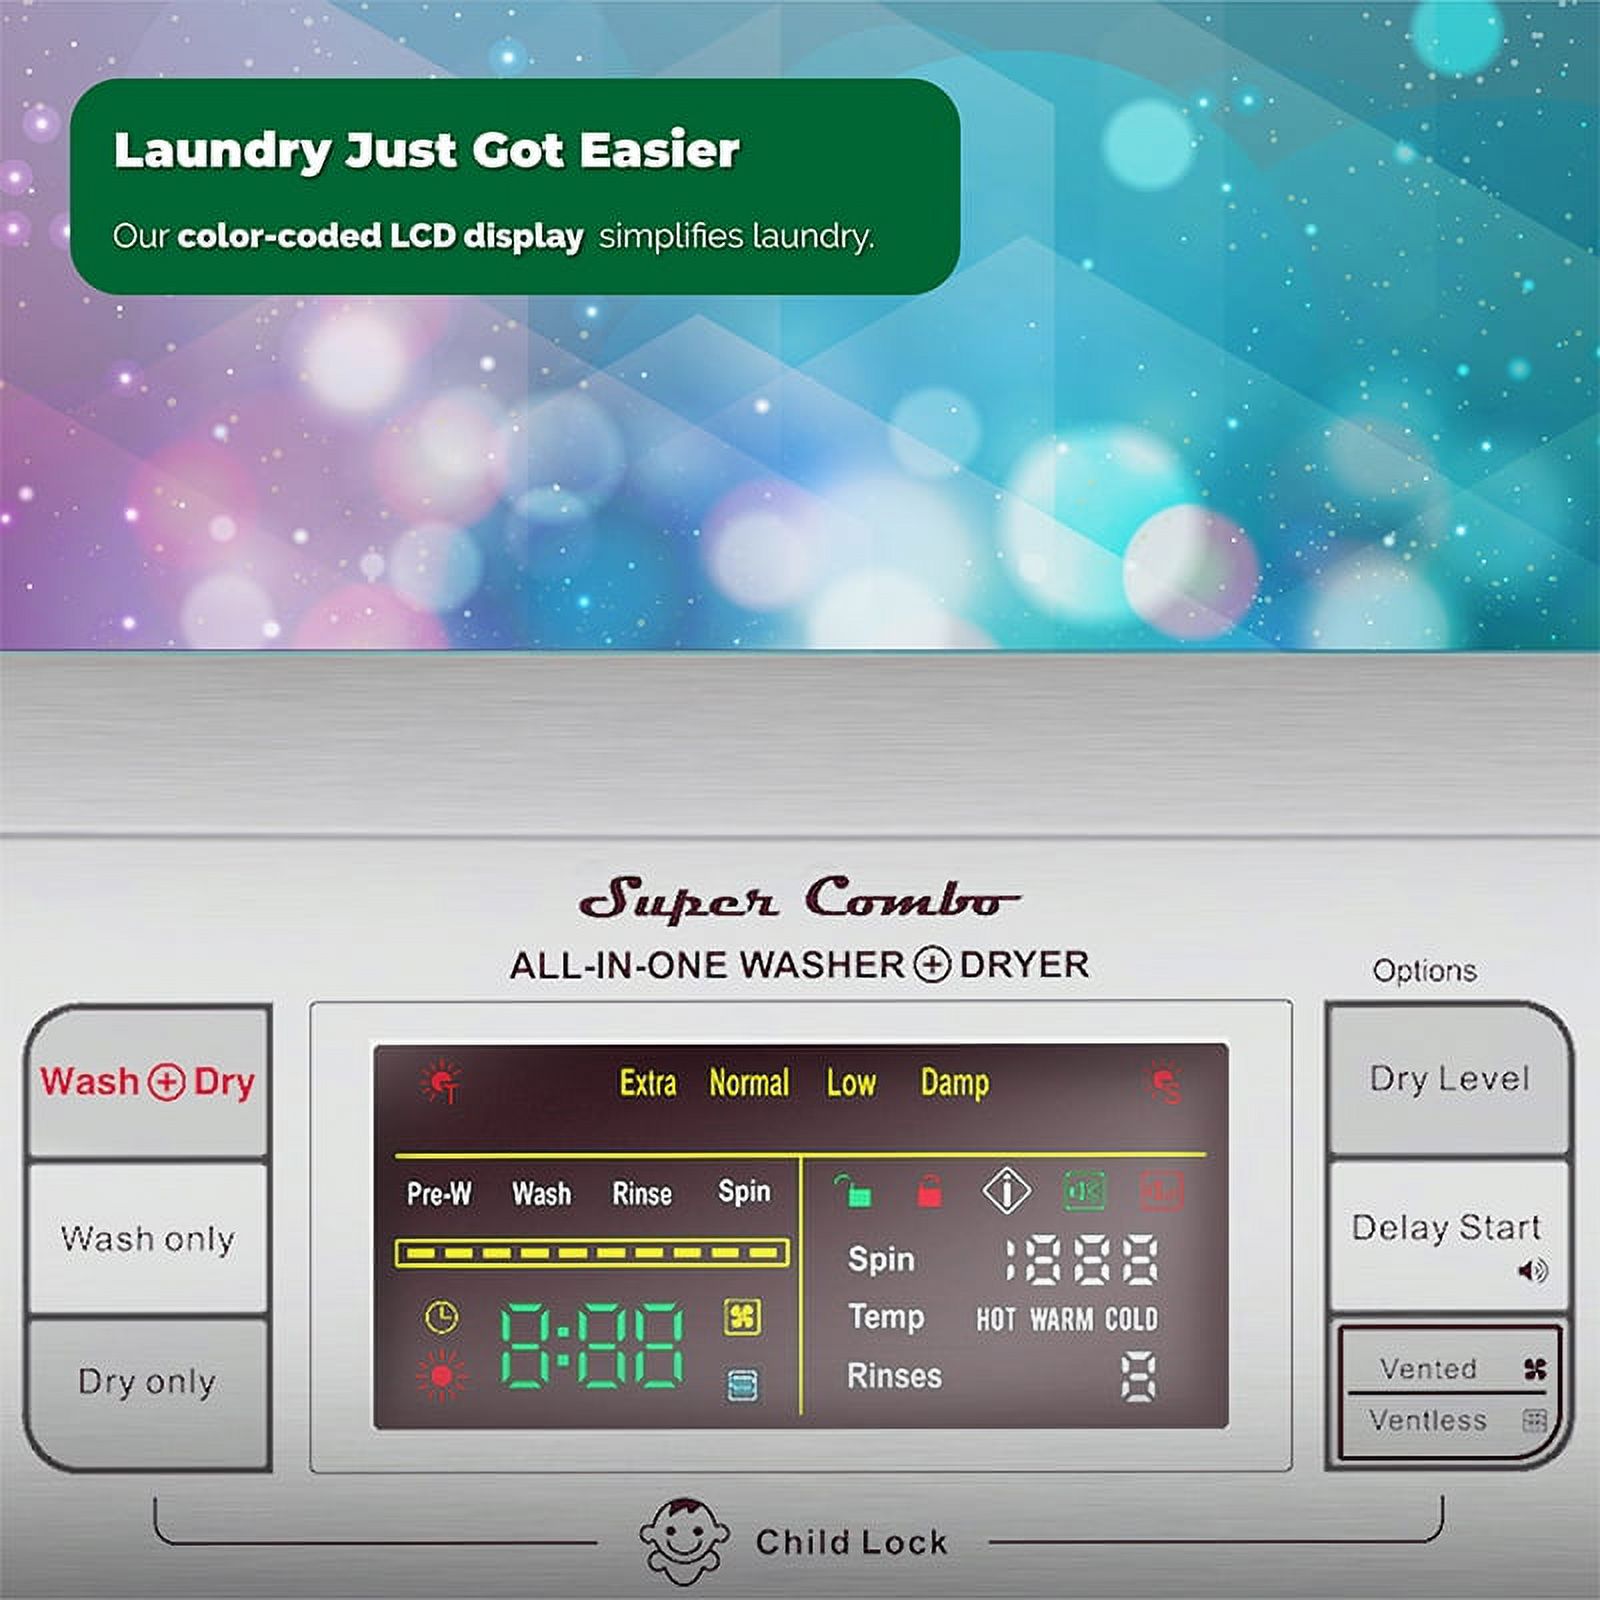 Equator Pro Compact 110V Vented/Ventless 13 lbs Combo Washer Sensor Dry 1200 RPM - image 4 of 17